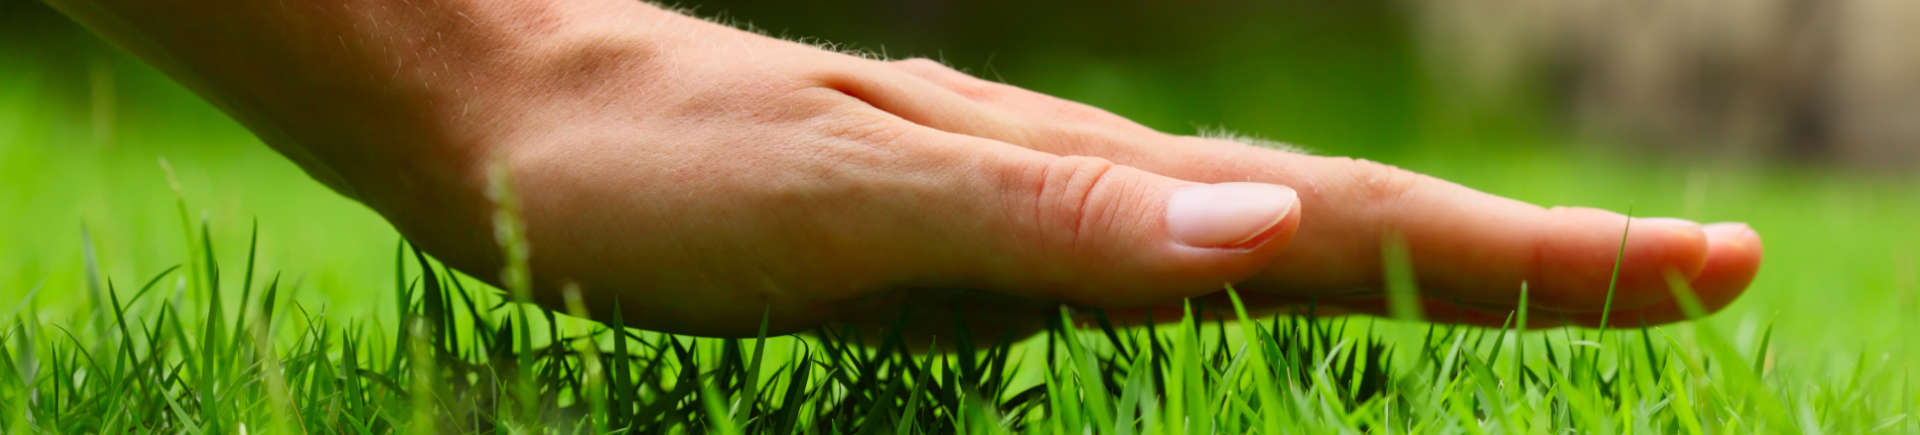 person touching grass with open hand